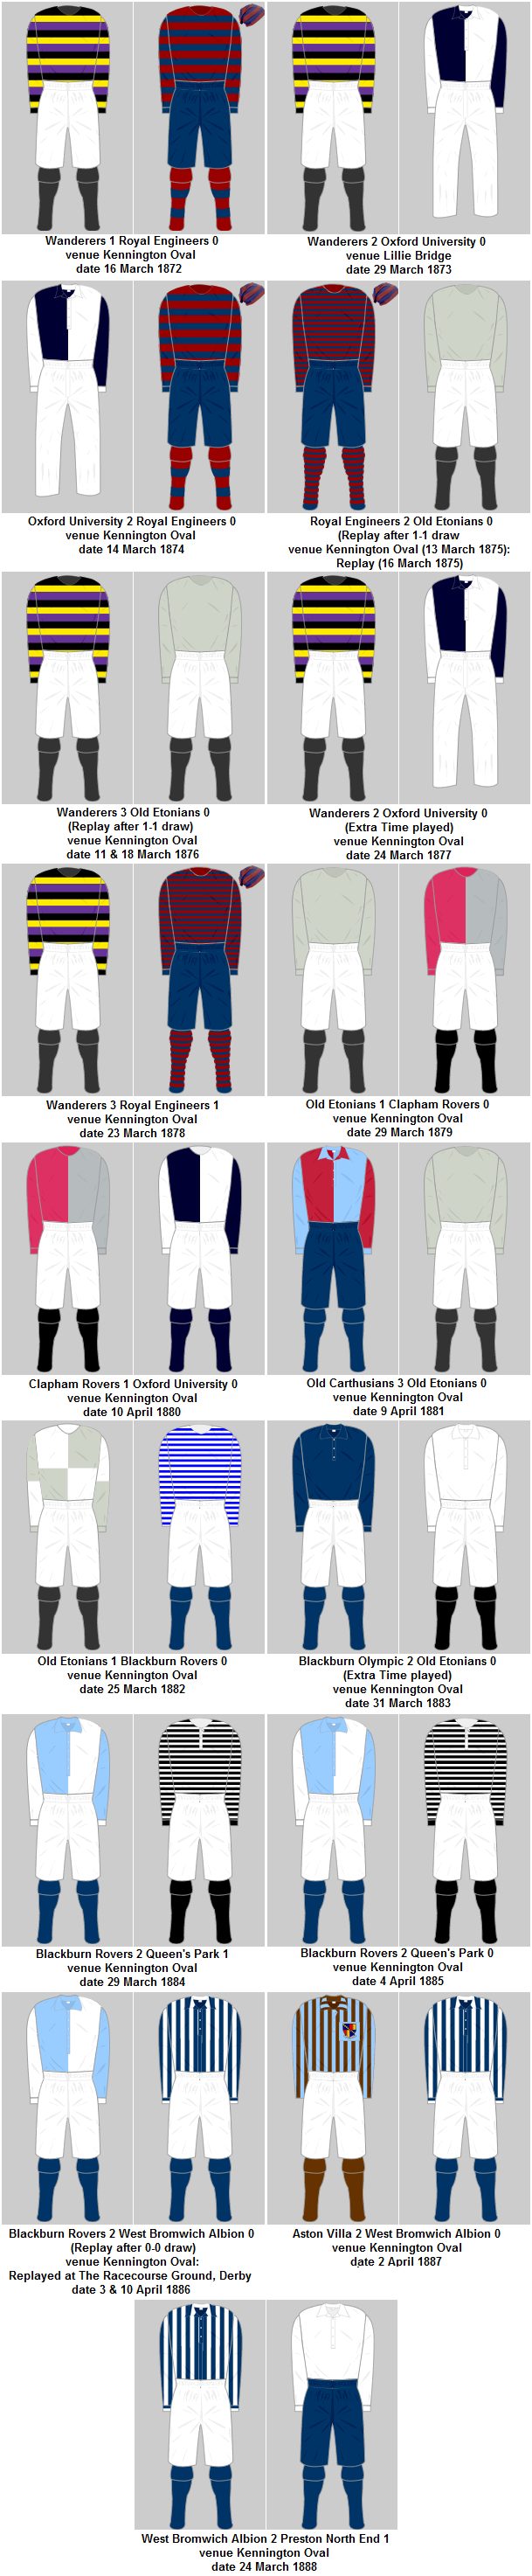 FA Cup Final Playing Kits 1871-72 to 1887-88